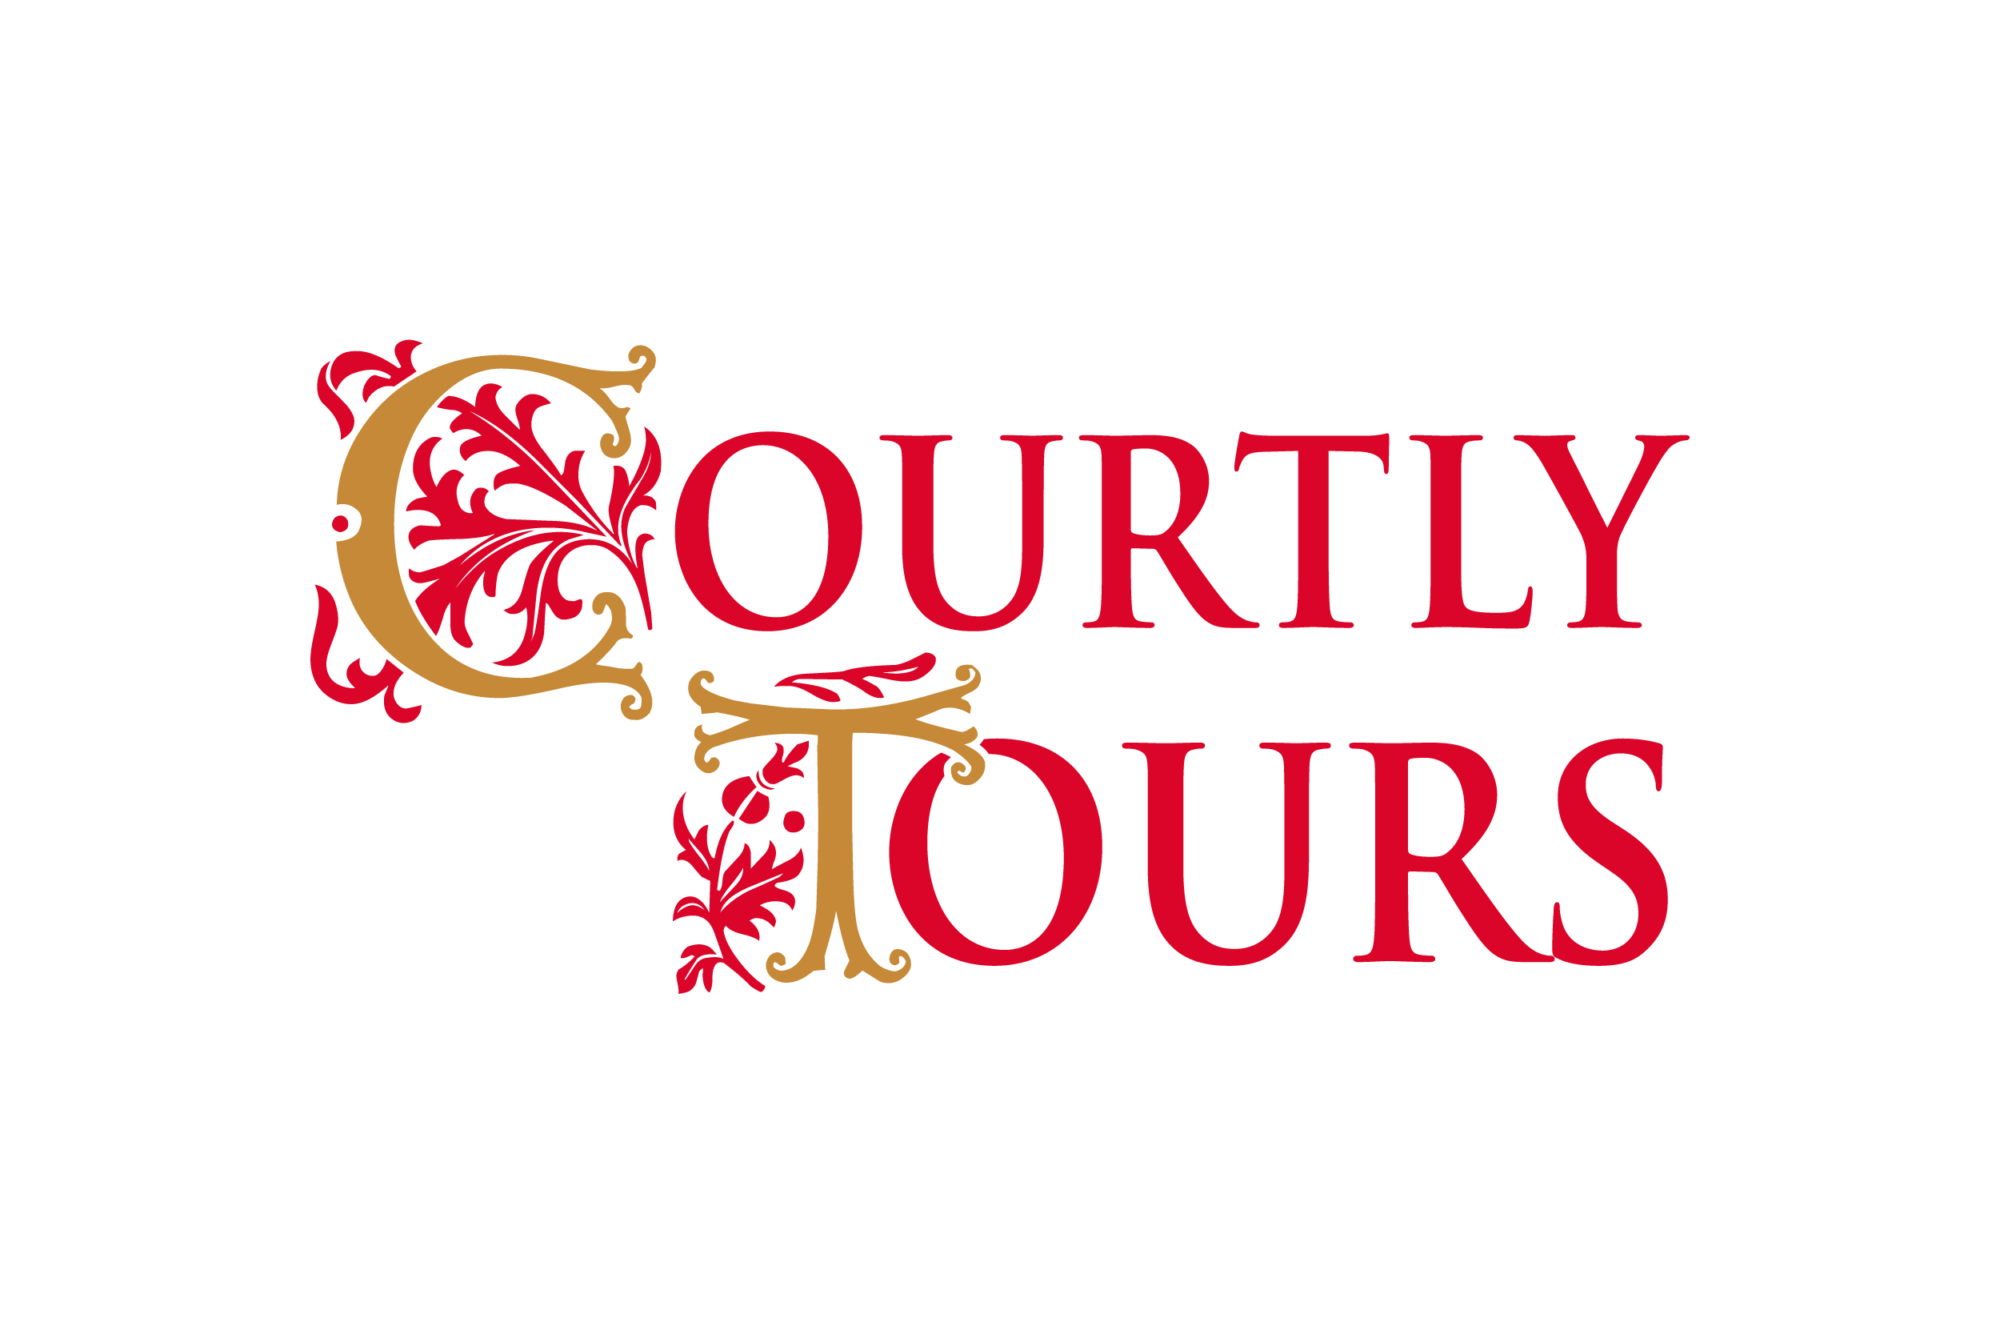 Courtly Tours